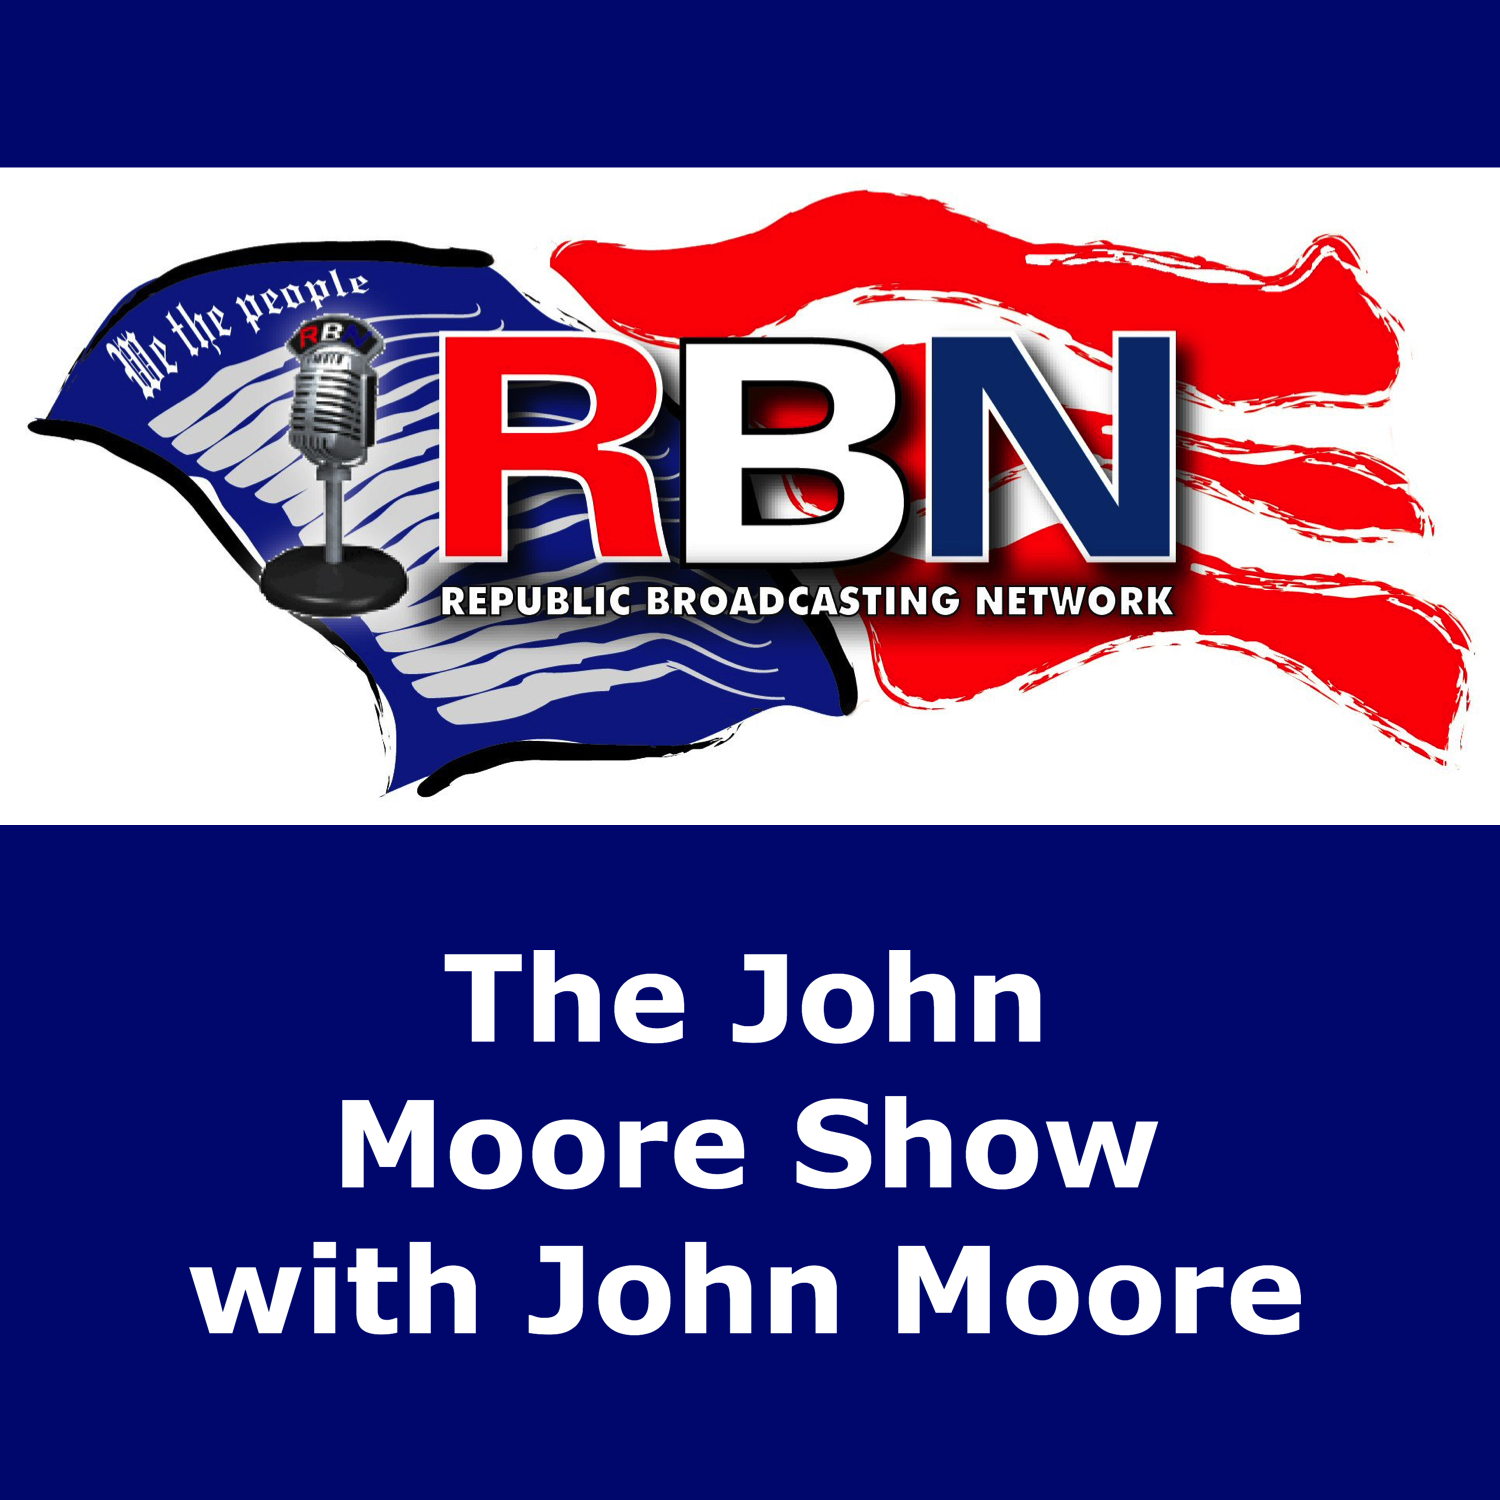 The John Moore Show with John Moore